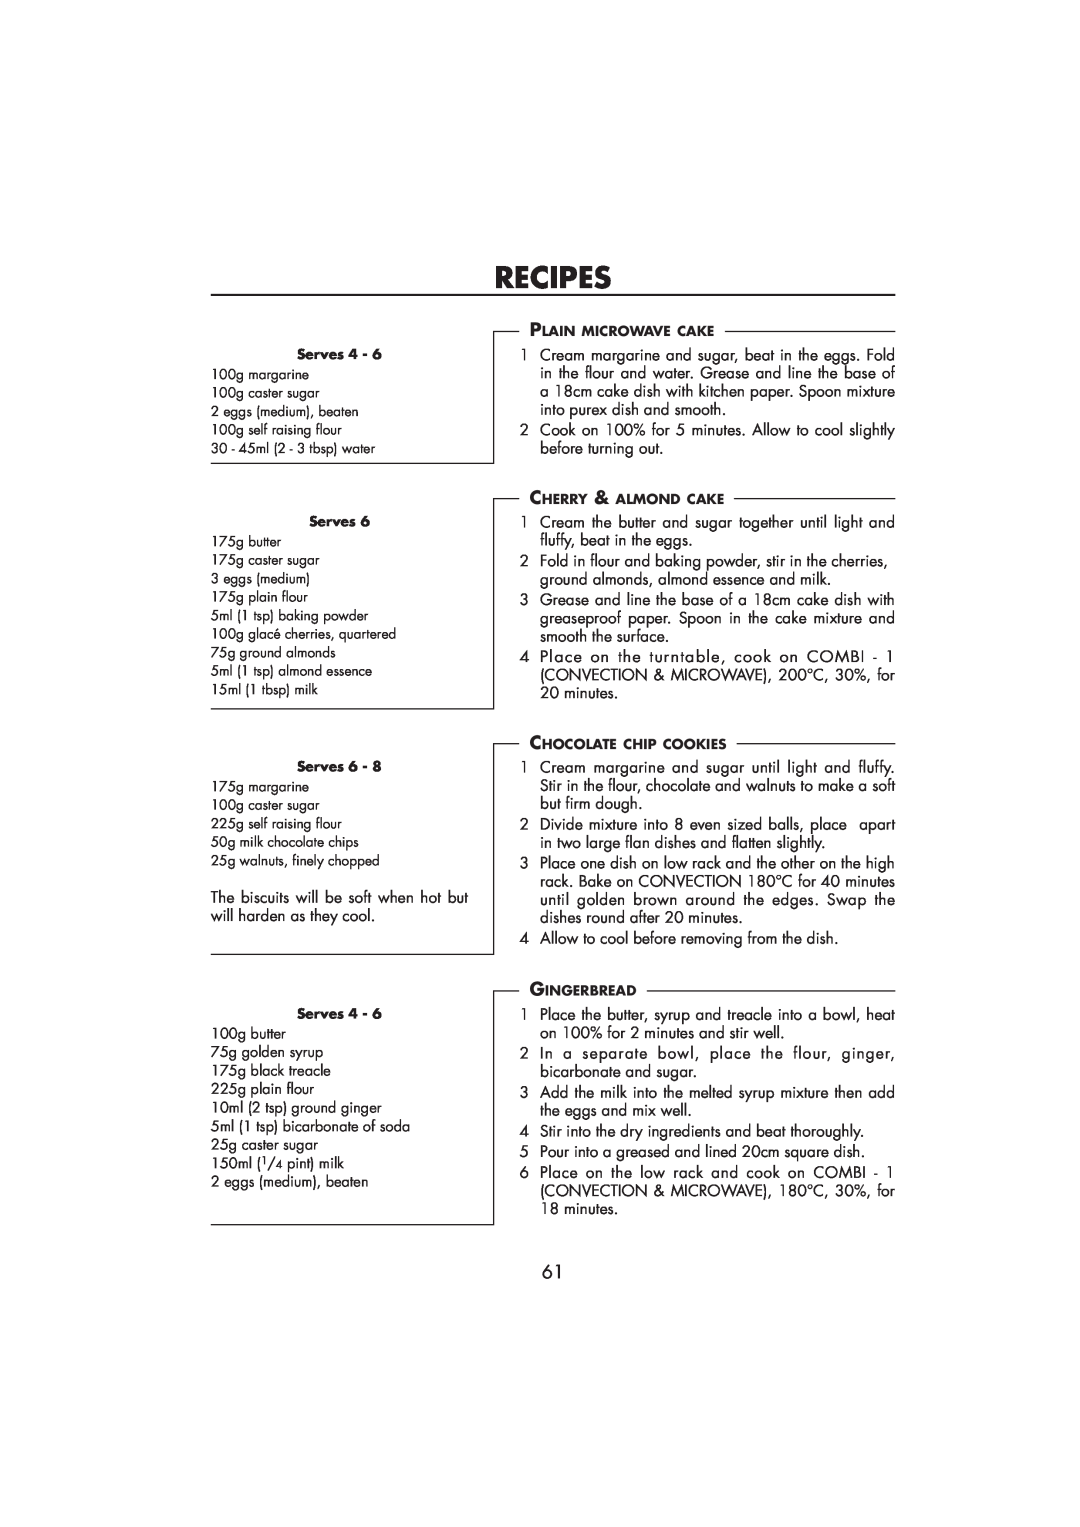 Sharp R-890SLM operation manual Recipes, The biscuits will be soft when hot but will harden as they cool 